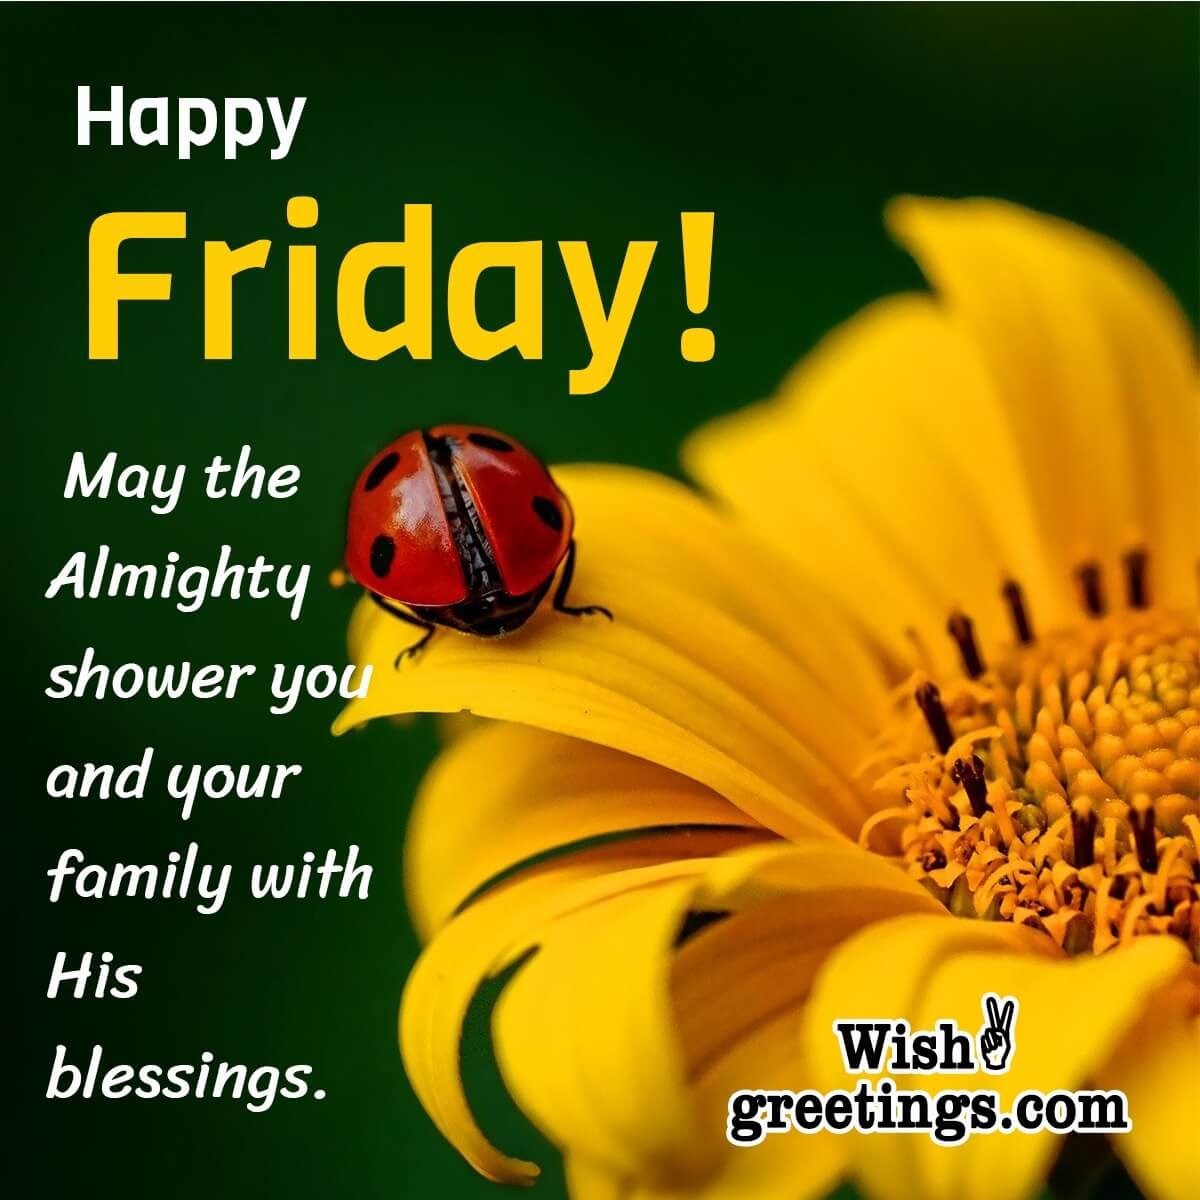 Happy Friday Blessings